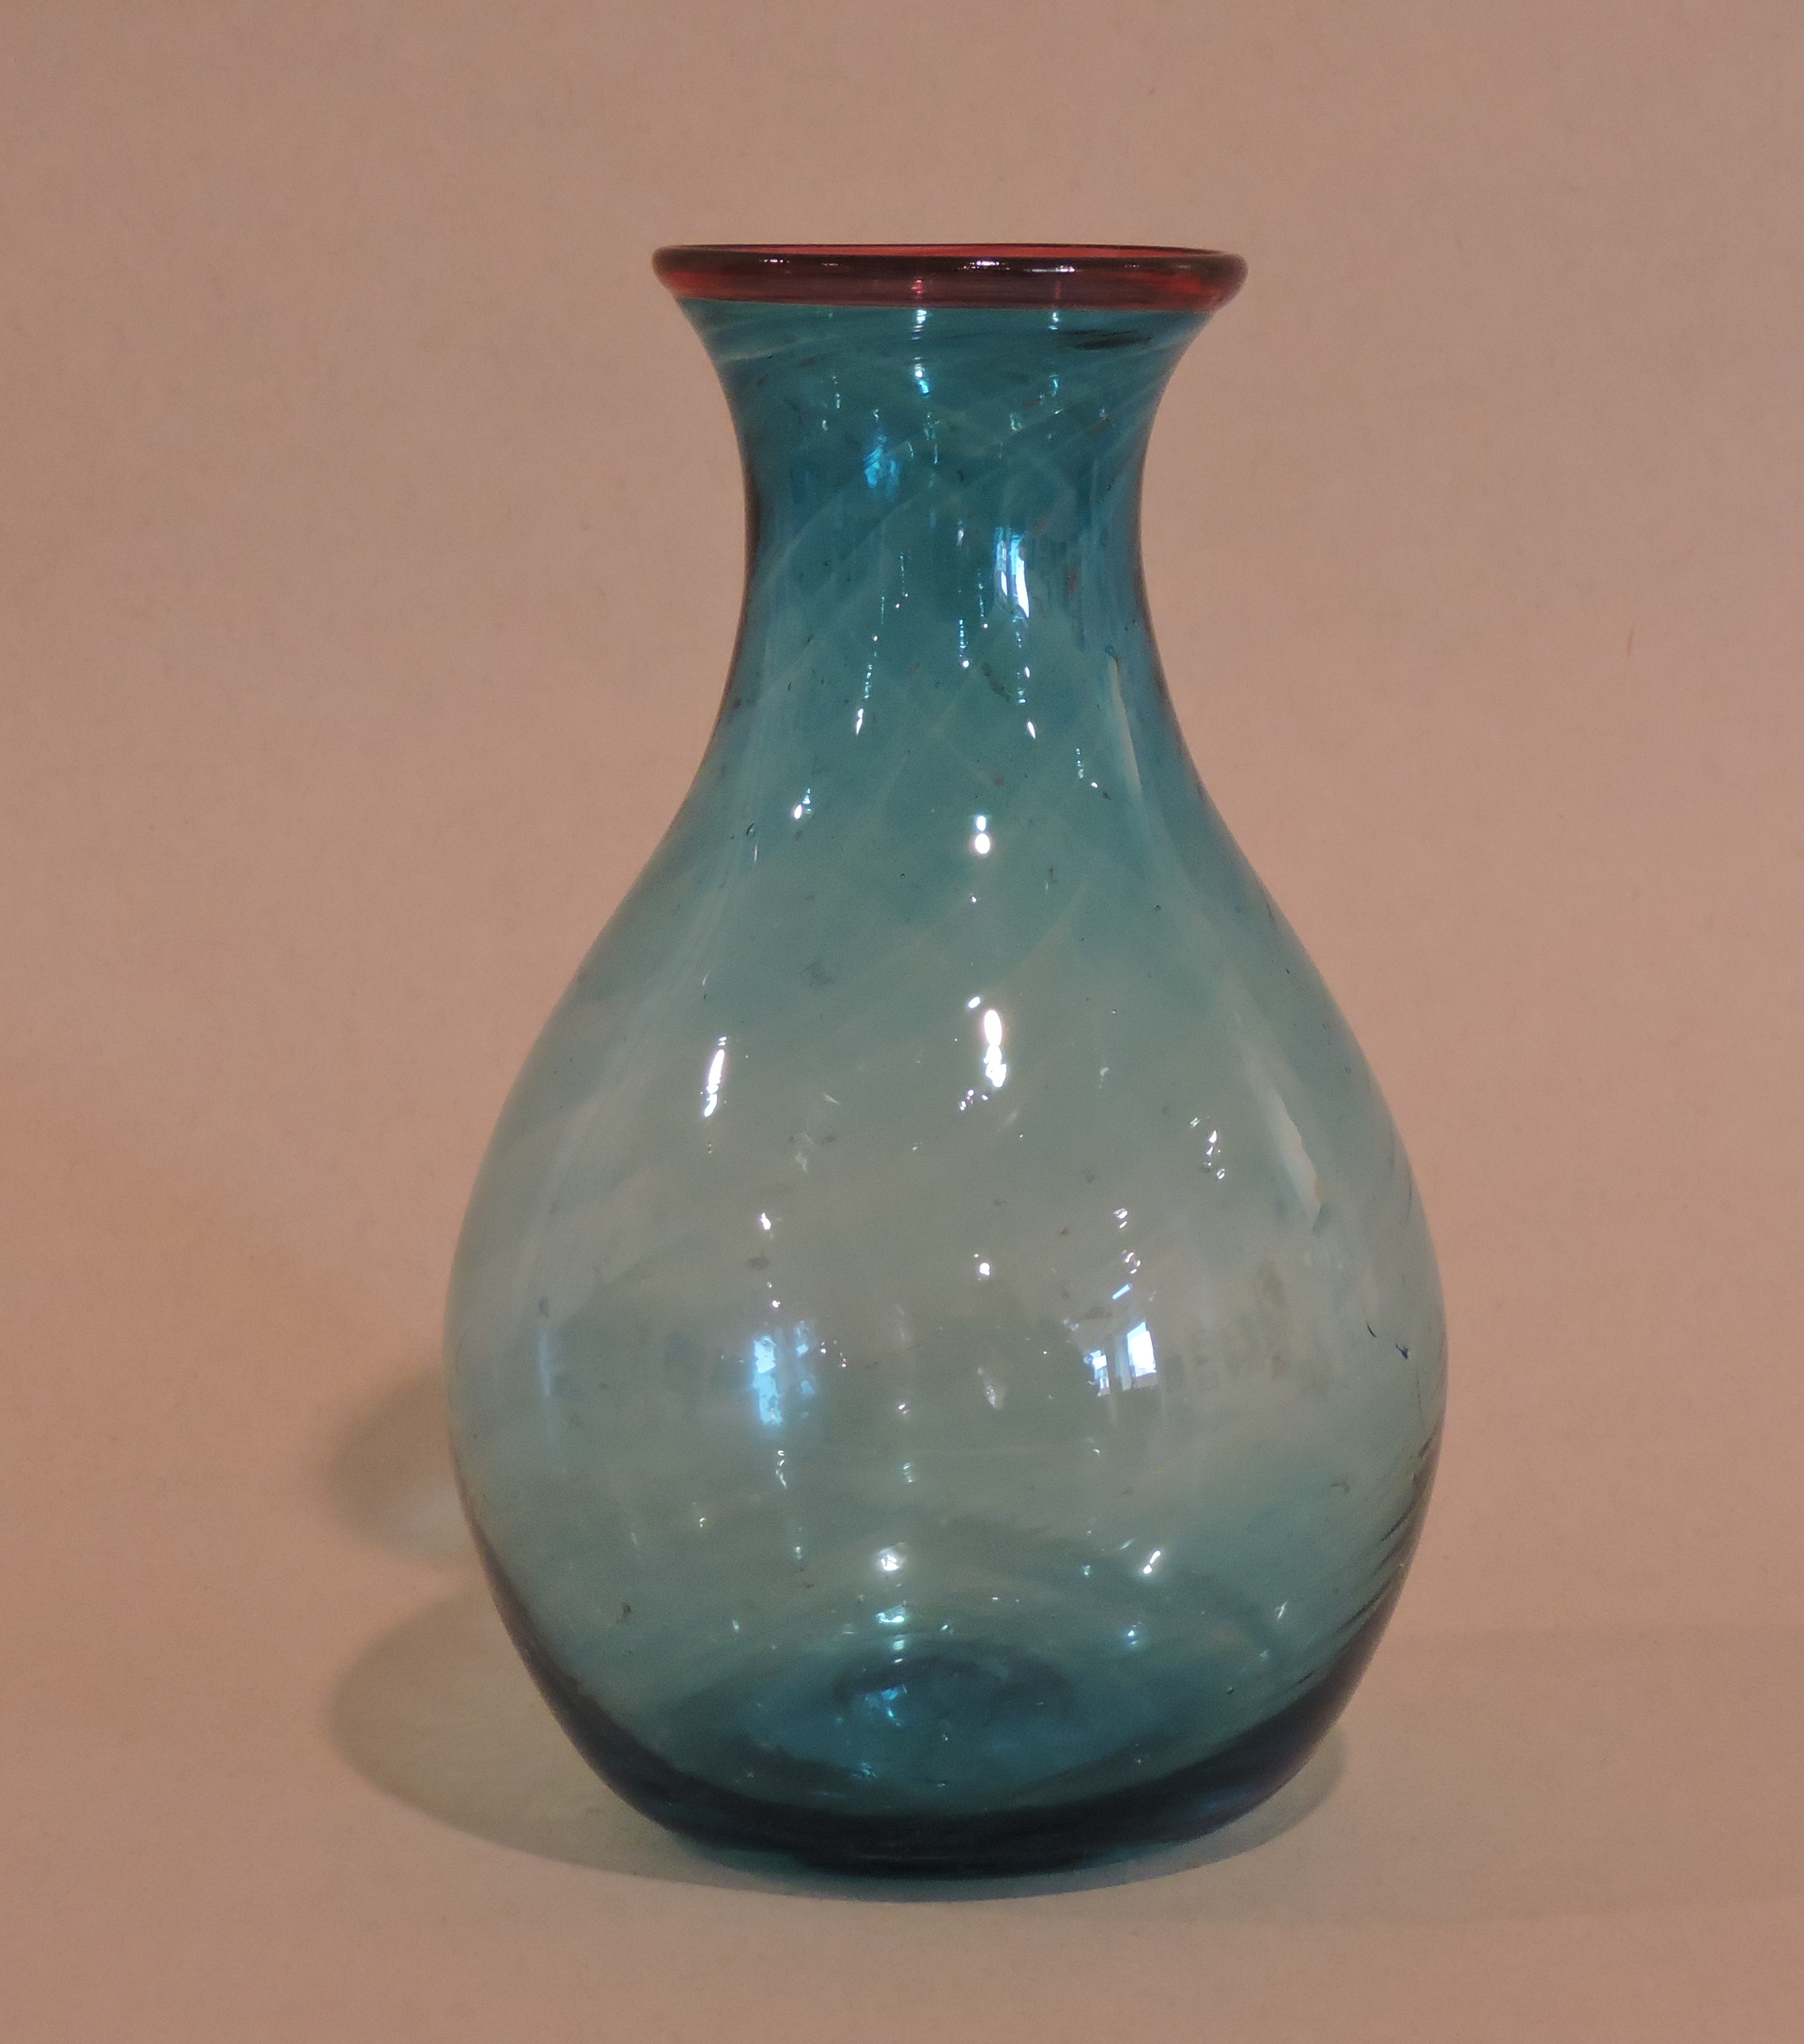 Turquoise/Red bud vase by Ryan Gothrup